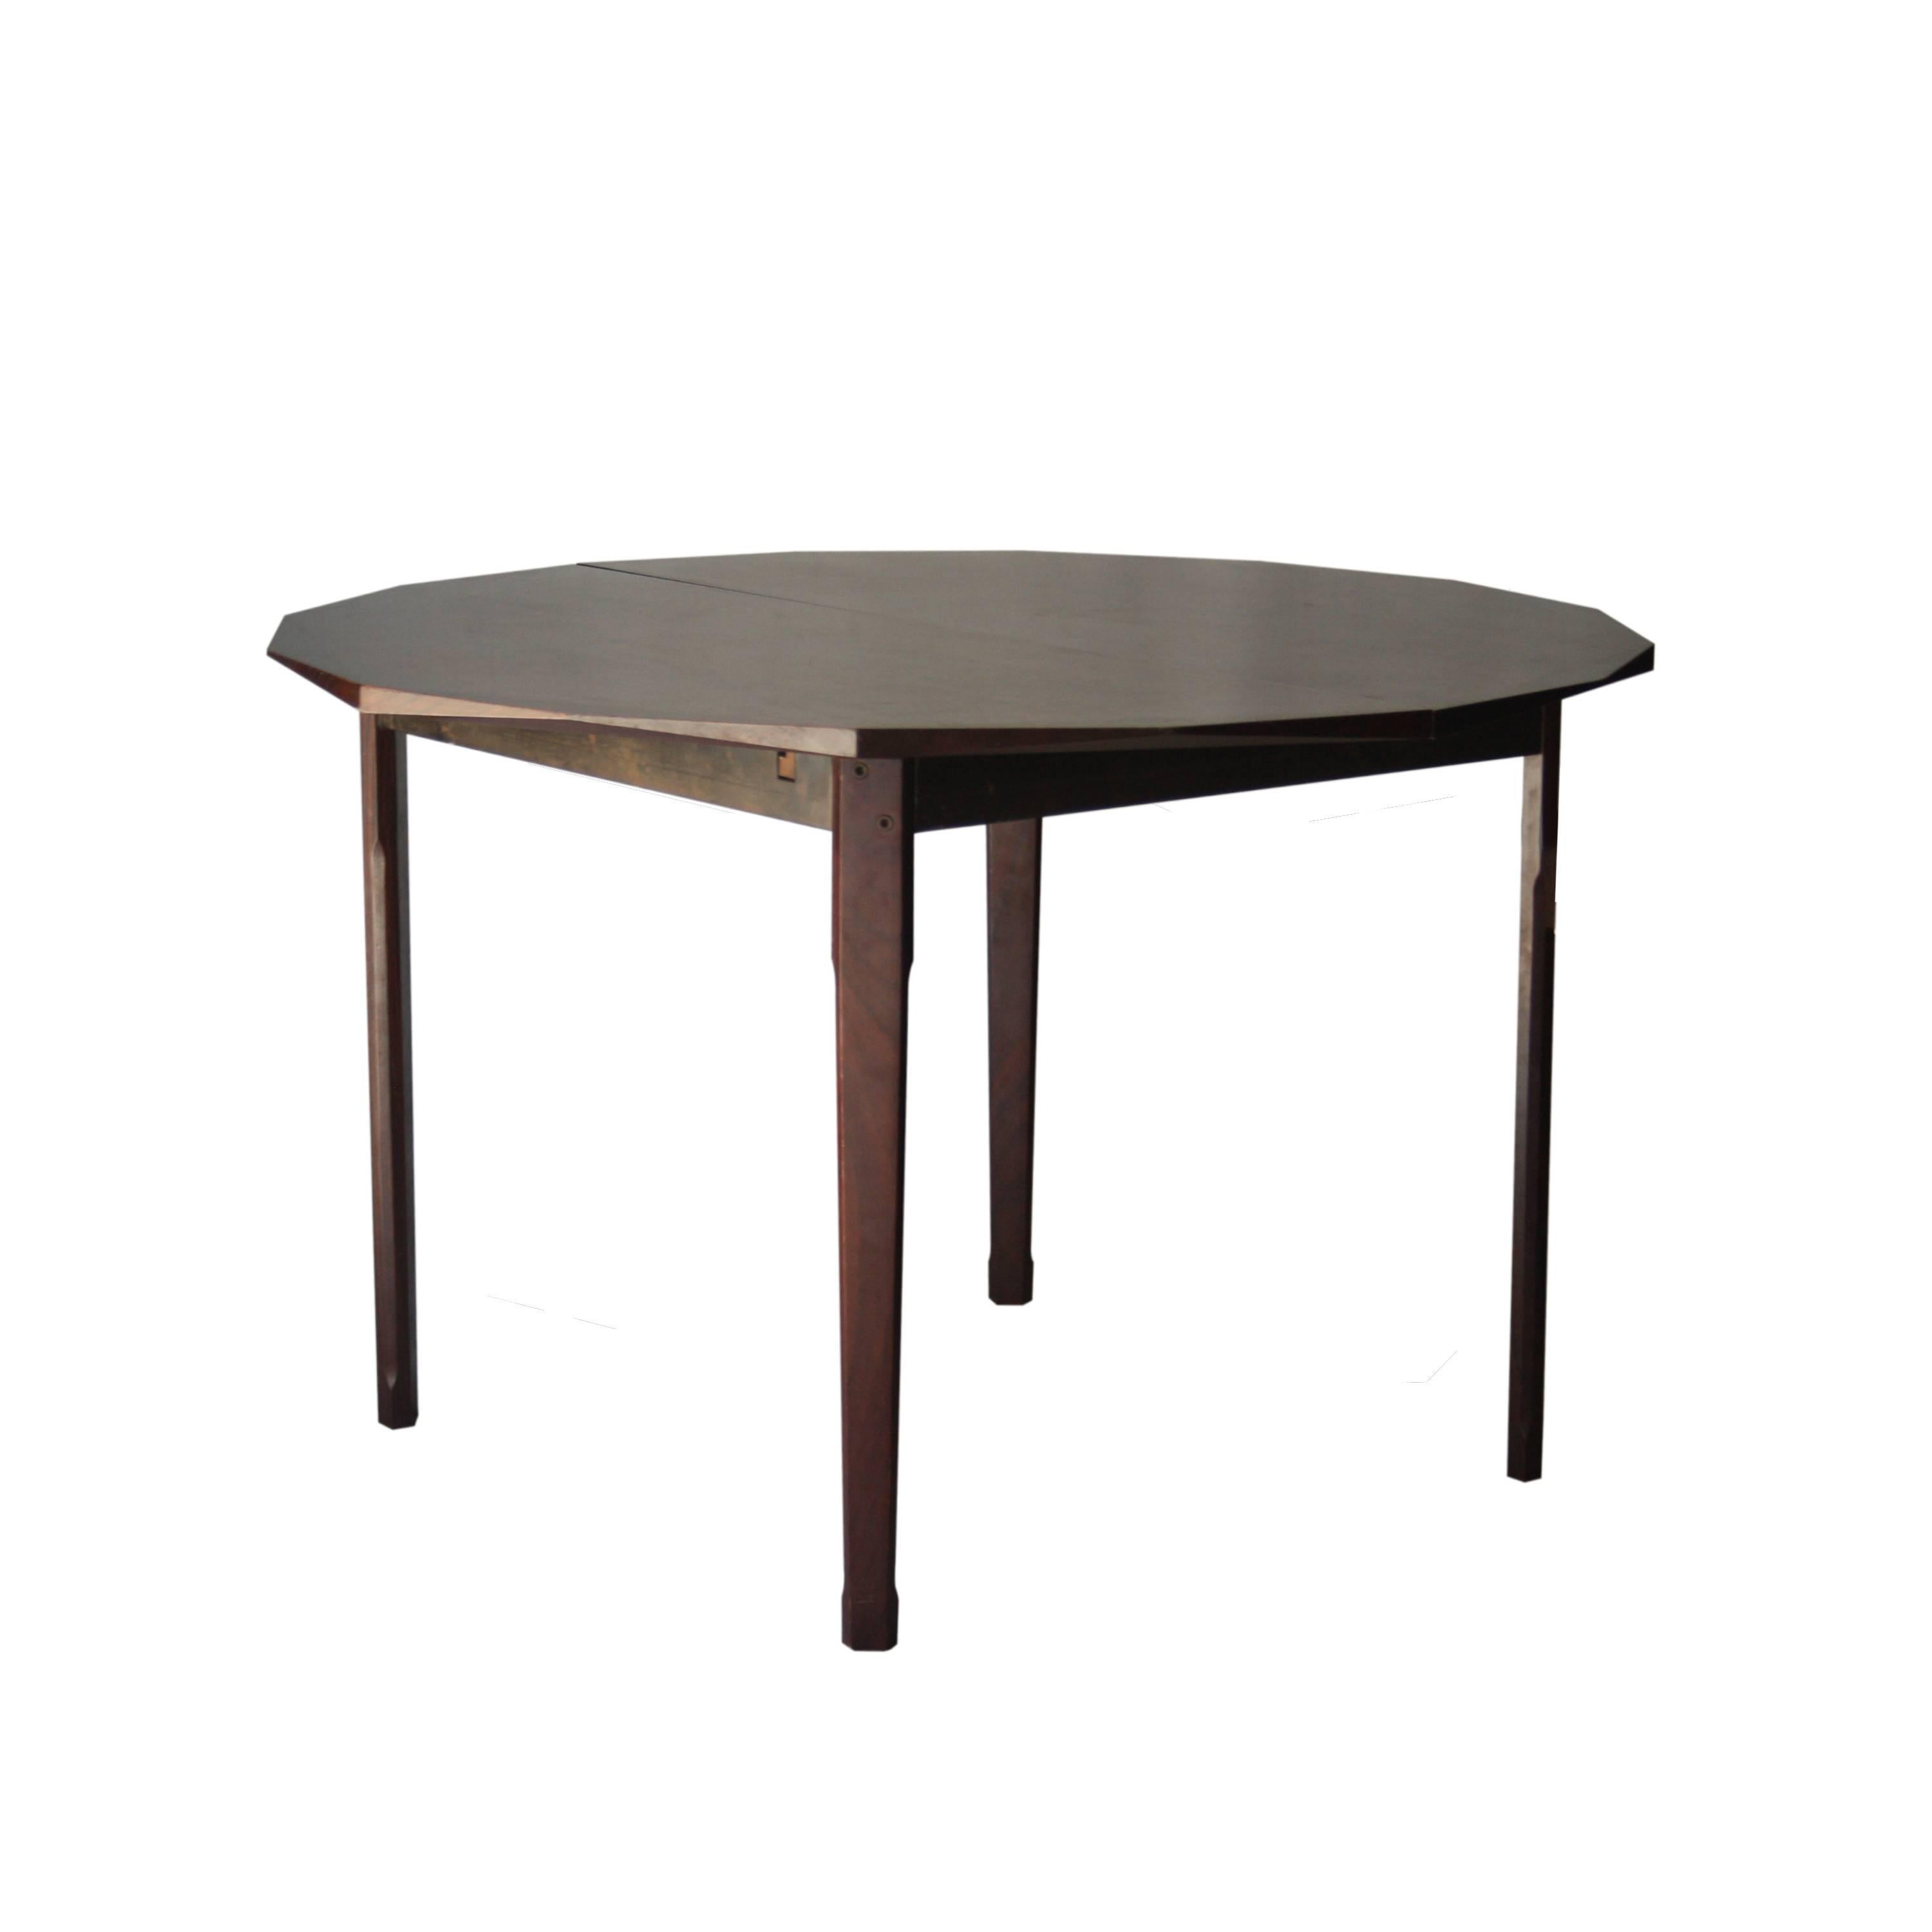 Extensible dining table. Geometric shaped top made of rosewood. Two extensible within.